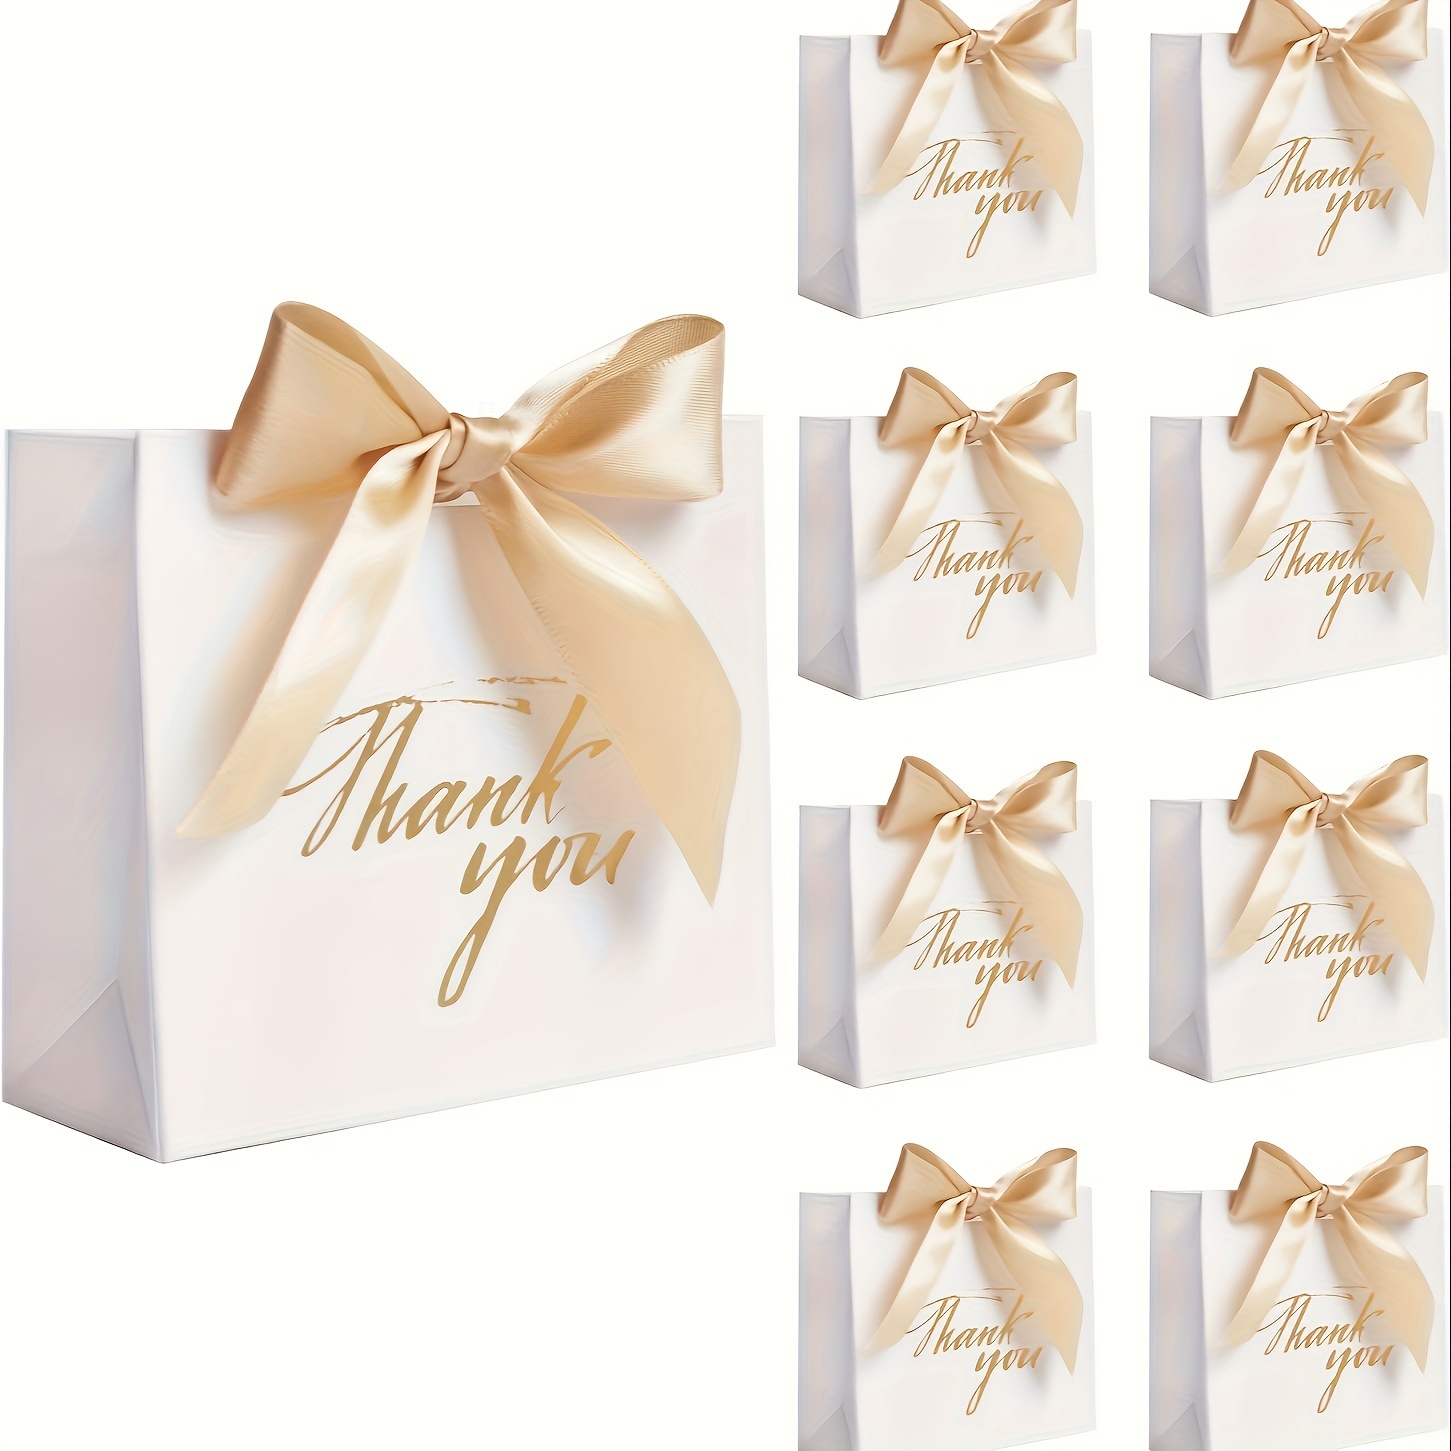 

50pcs, White Small Thank You Gift Bags, 4.5x1.8x3.9 Inch Mini Gift Bags Candy Bags Bulk With Gold Bow Ribbon For Easter Baby Shower Birthday Wedding Party Favors Bridesmaid Celebration